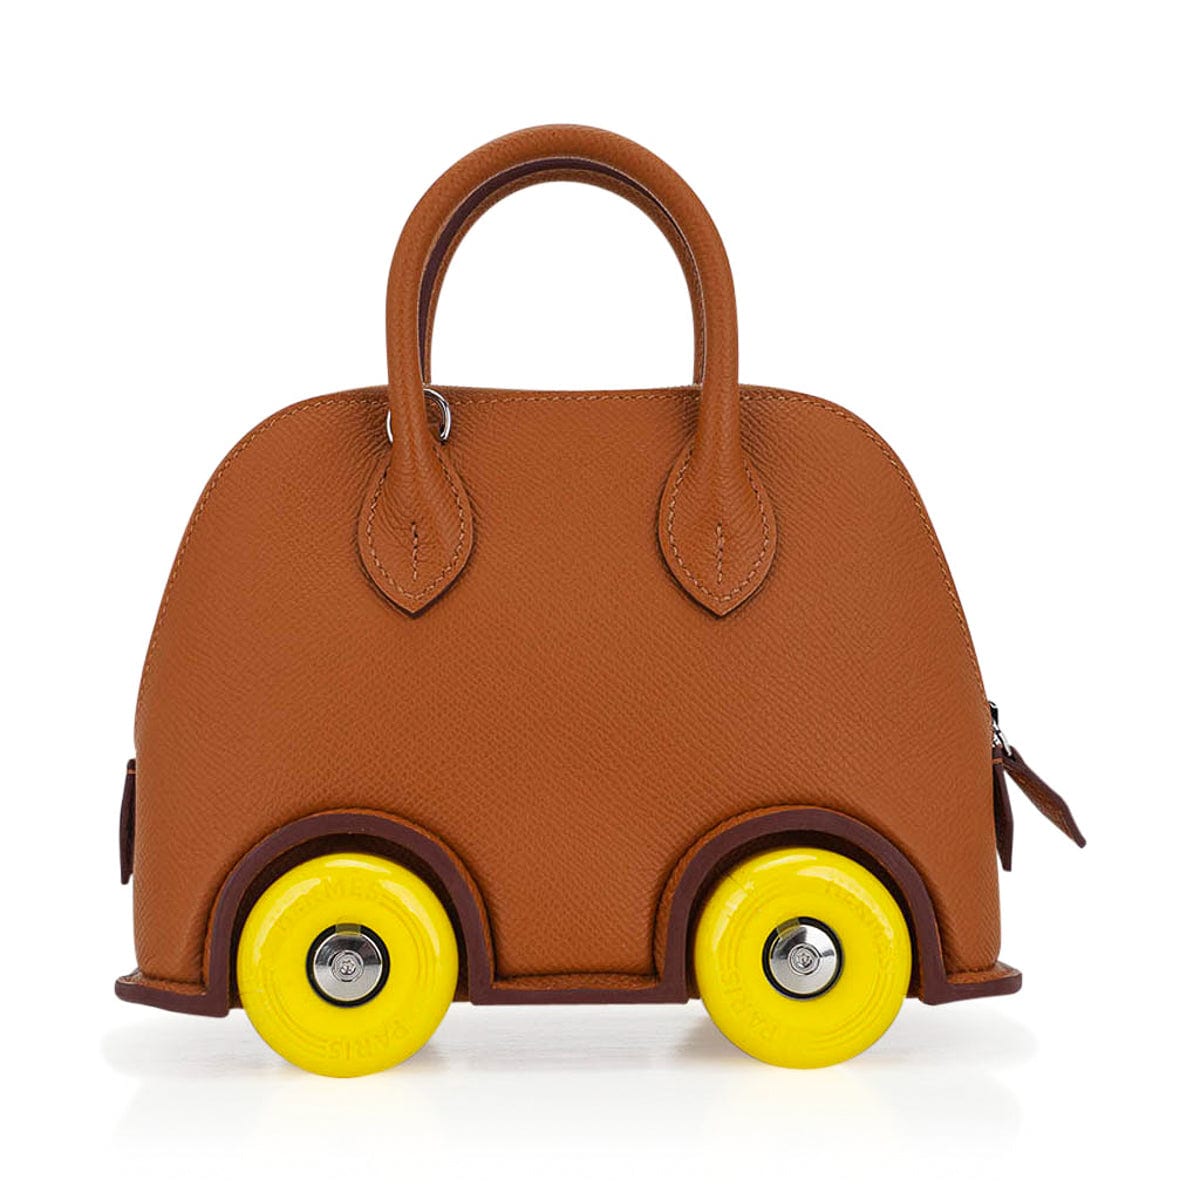 Hermes Limited Edition Mini Bolide 1923 Bag On Wheels in Gold Togo